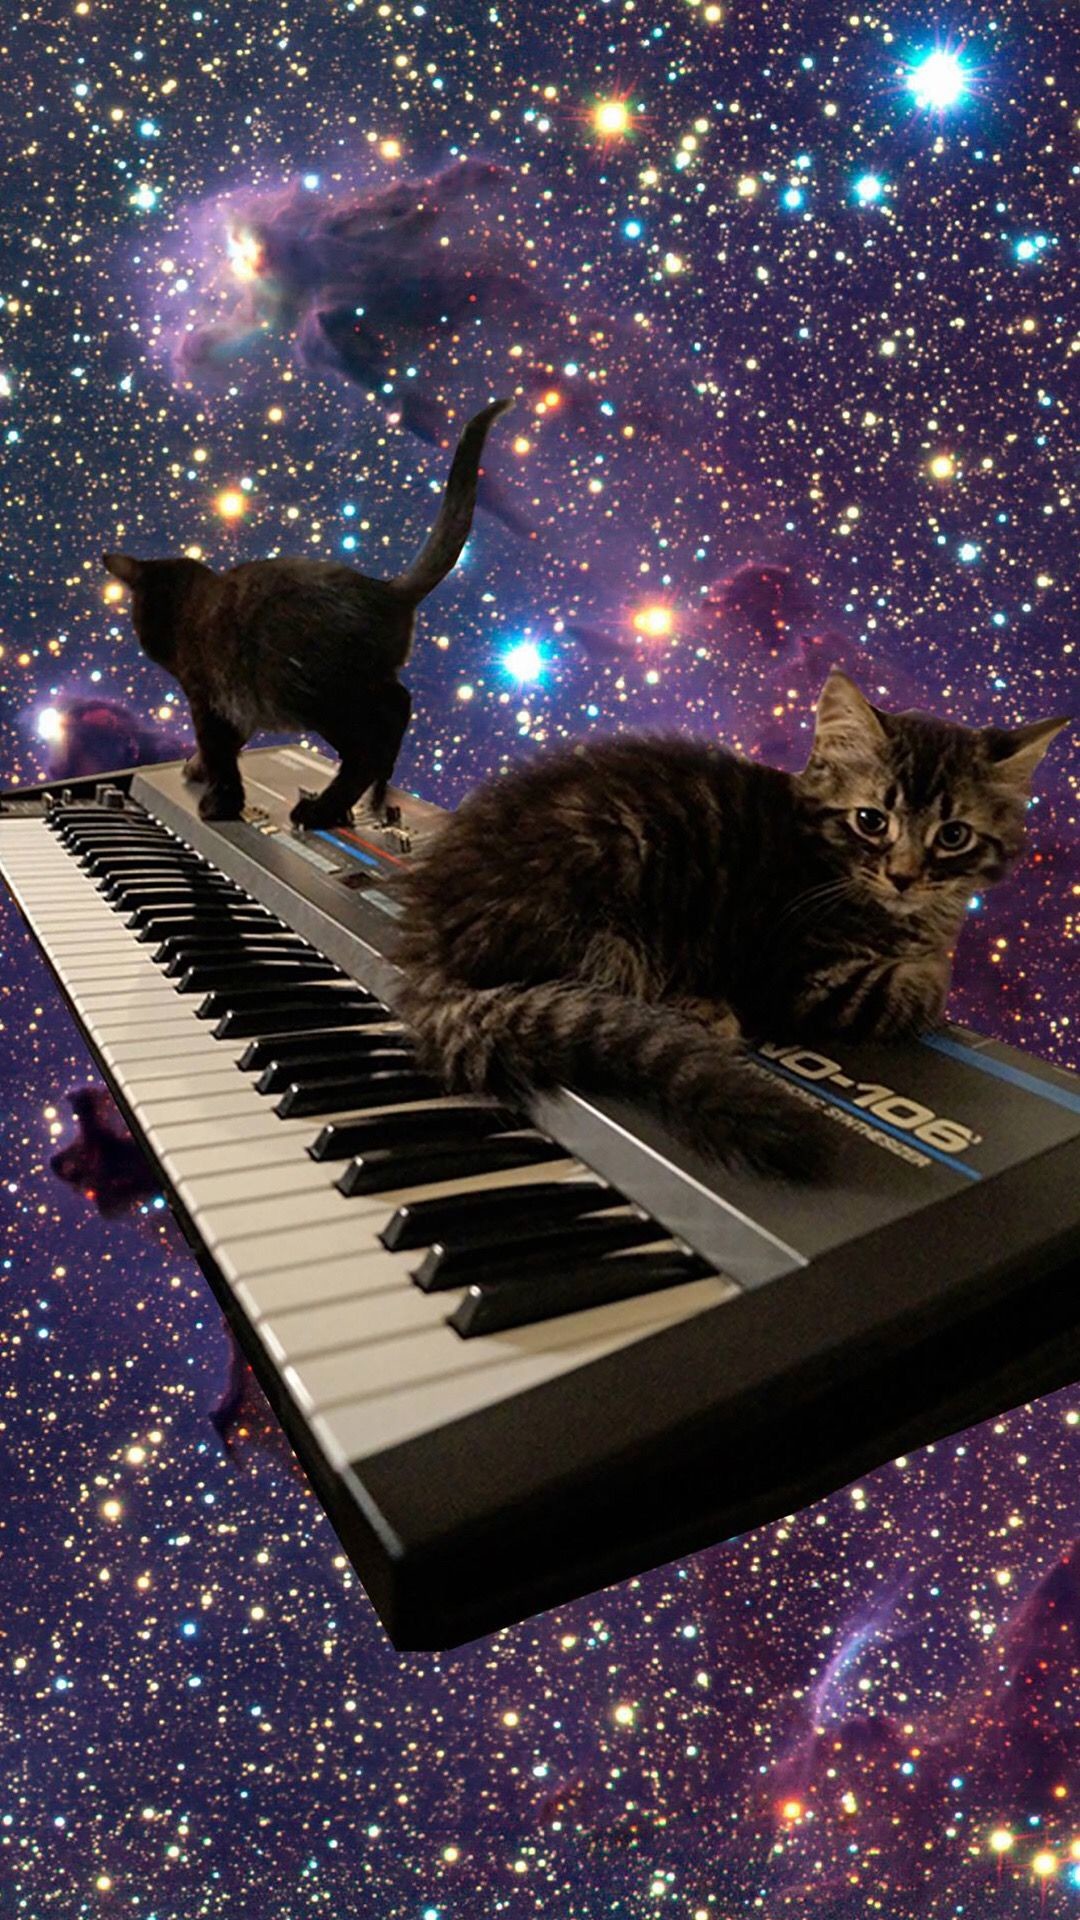 1080x1920 Electronic Music, Funny Cats, Galaxy Cat, Space, Cute Animals, Kitty Cats